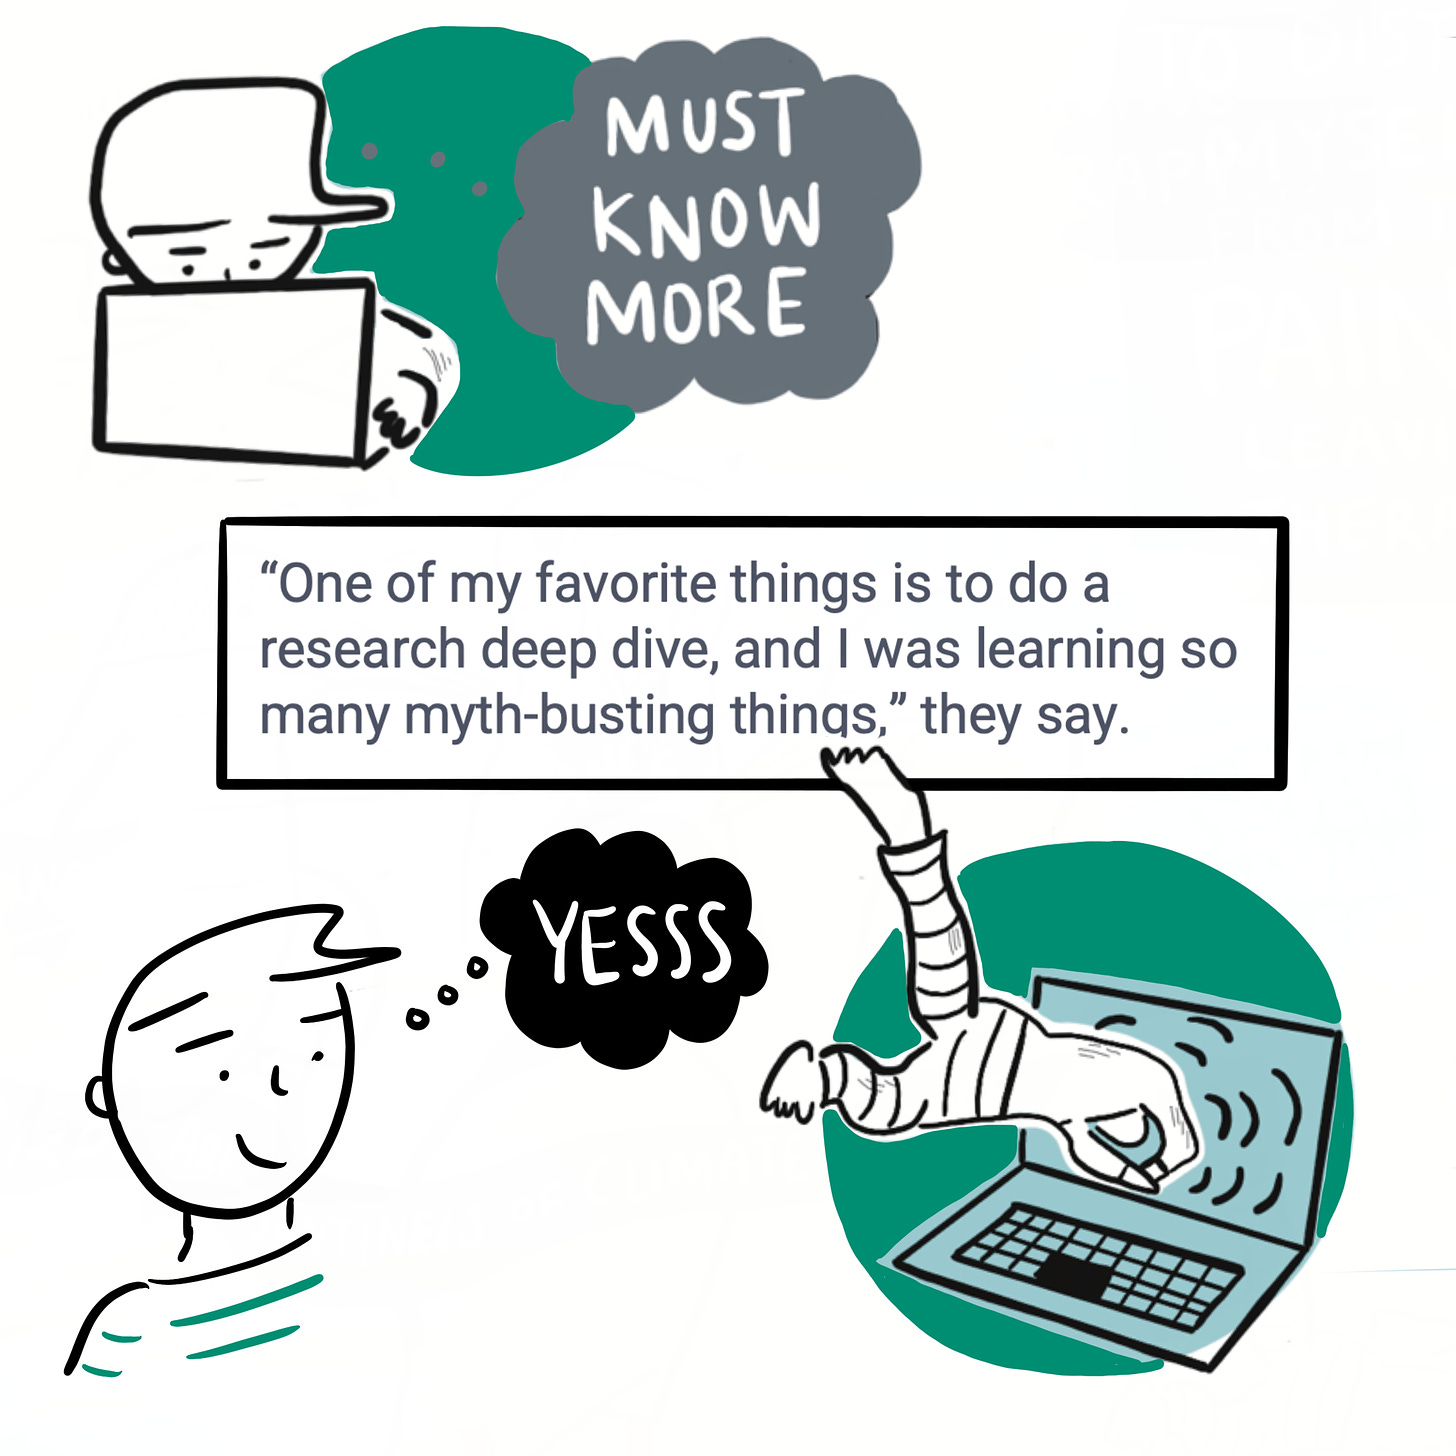 Cartoonist looking at laptop thinking “must knkow more.” One of my favorite things is to do a research deep die, and I was learning so many myth-busting things, they say.Cartoonist thinking “yesss” and staring at an image of themself diving into a laptop.